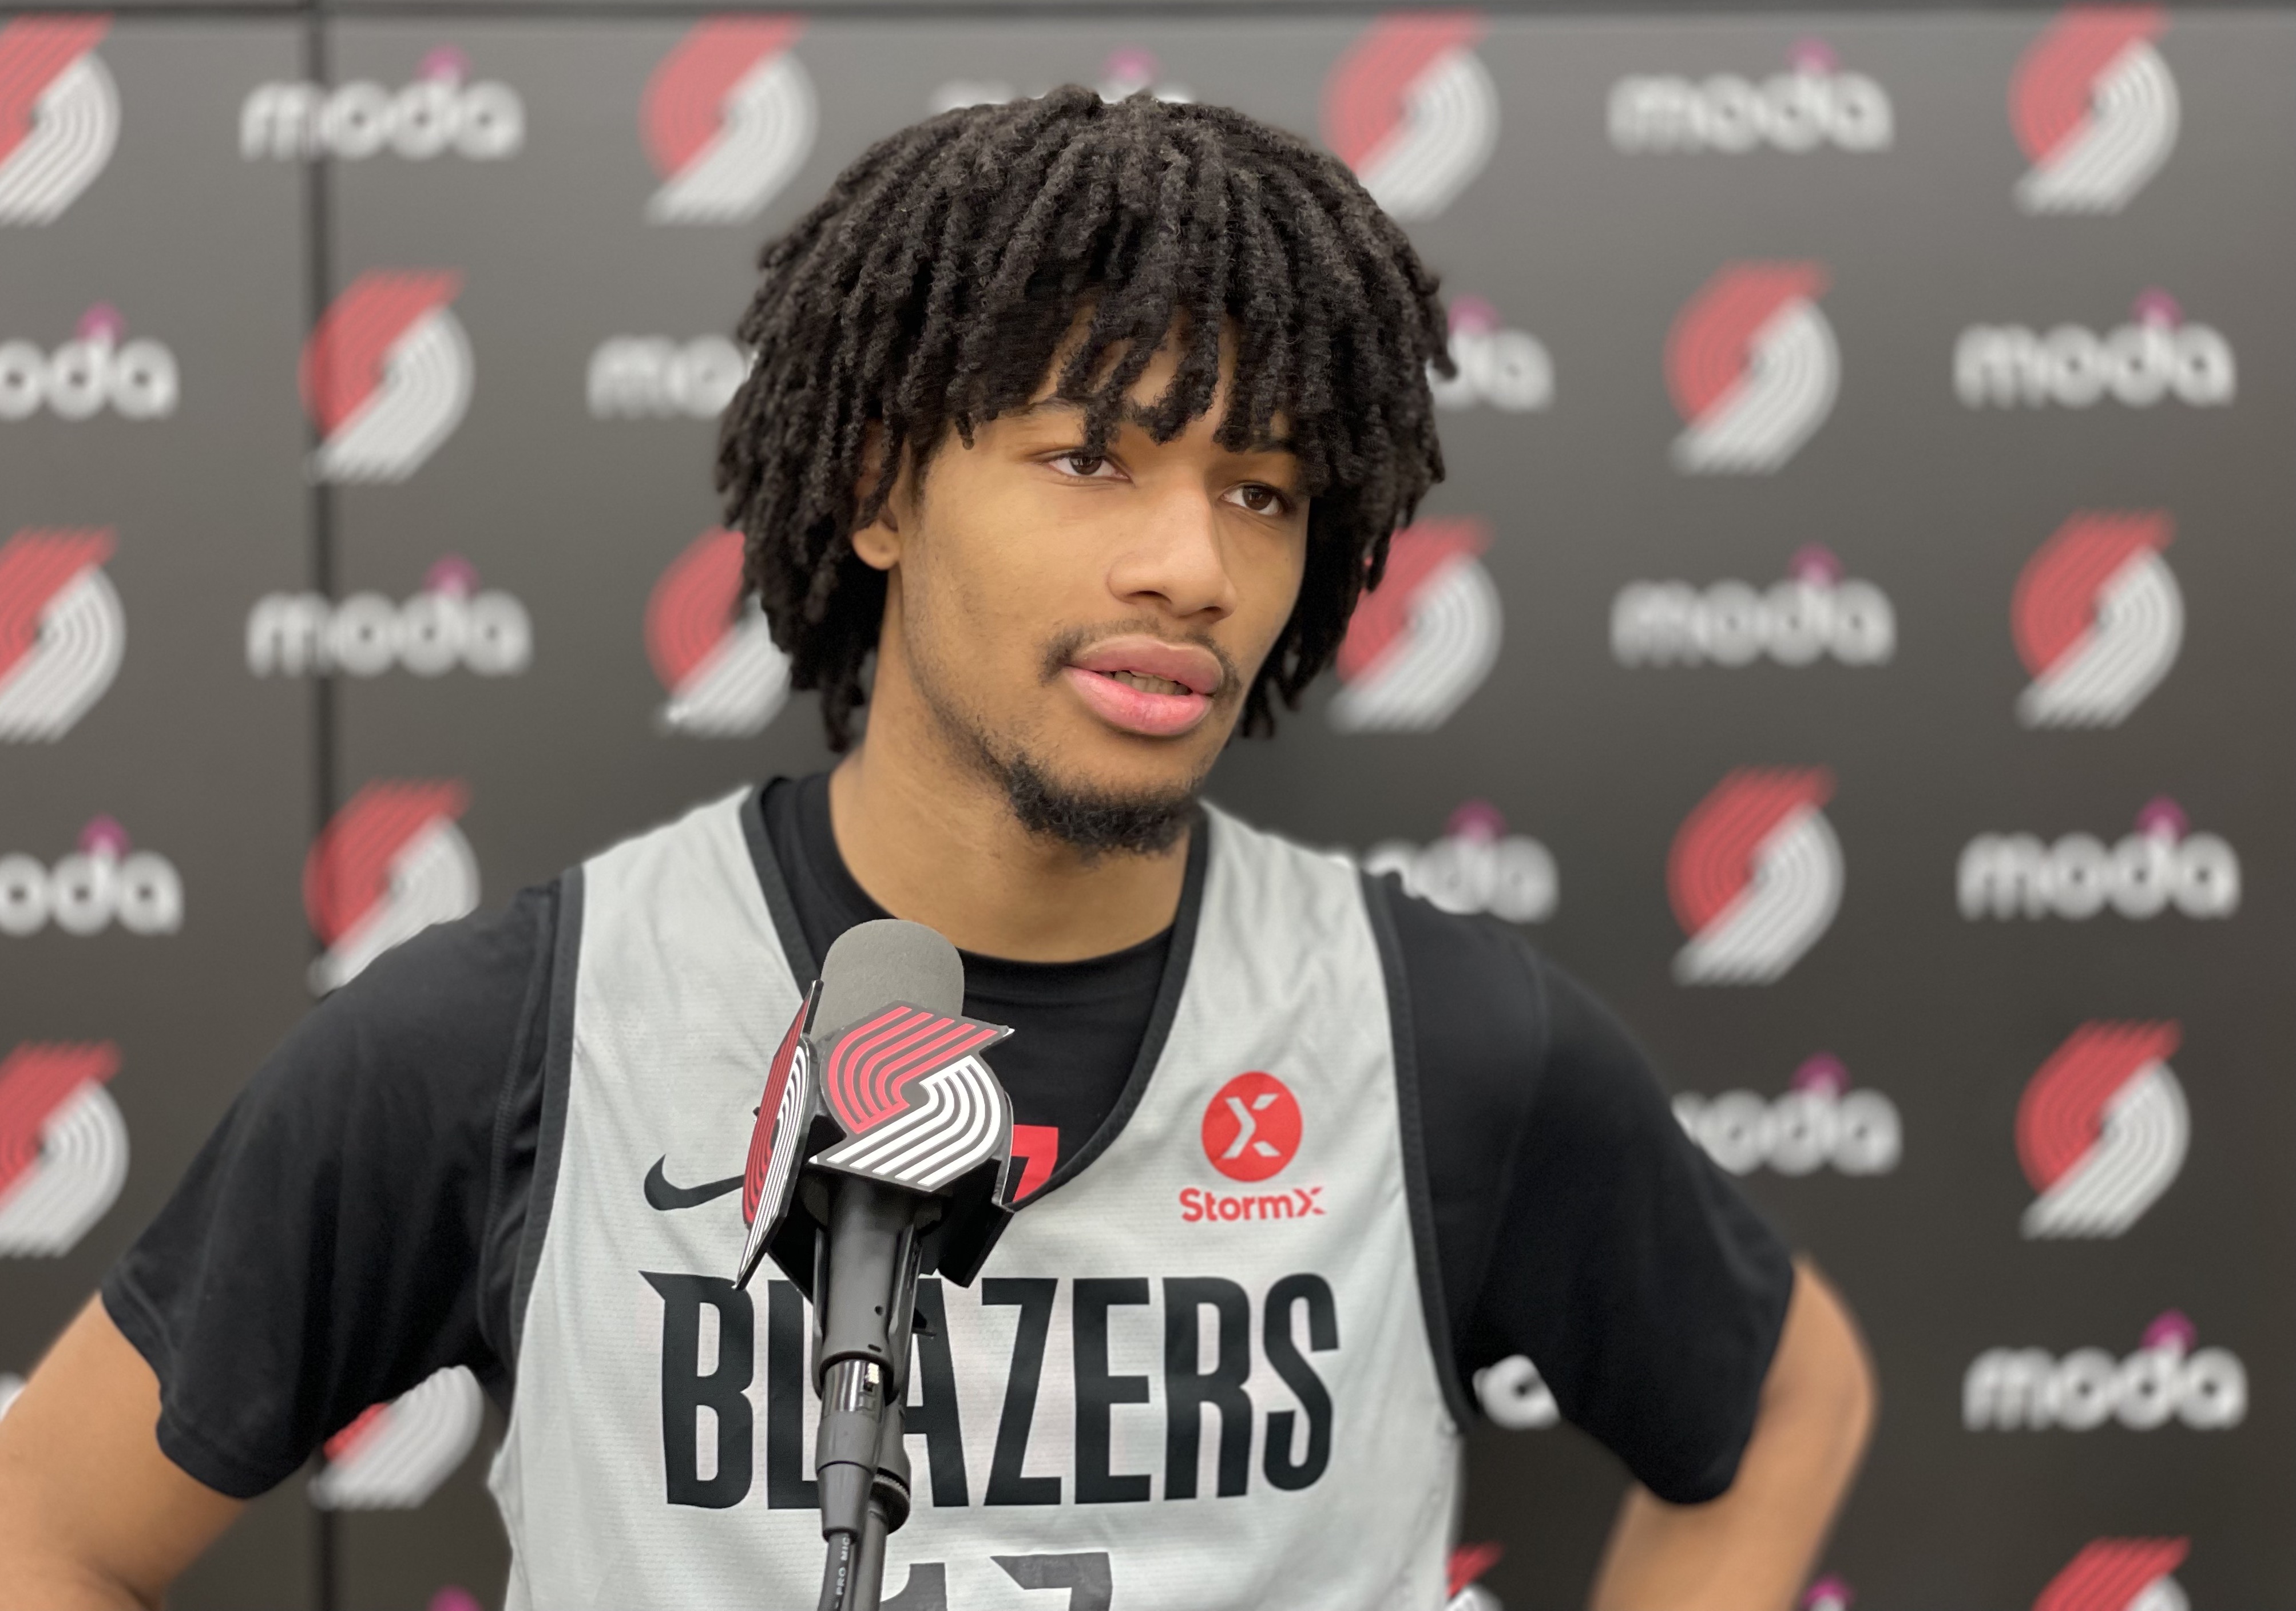 No. 1 recruit Shaedon Sharpe will not be eligible for the 2022 NBA Draft